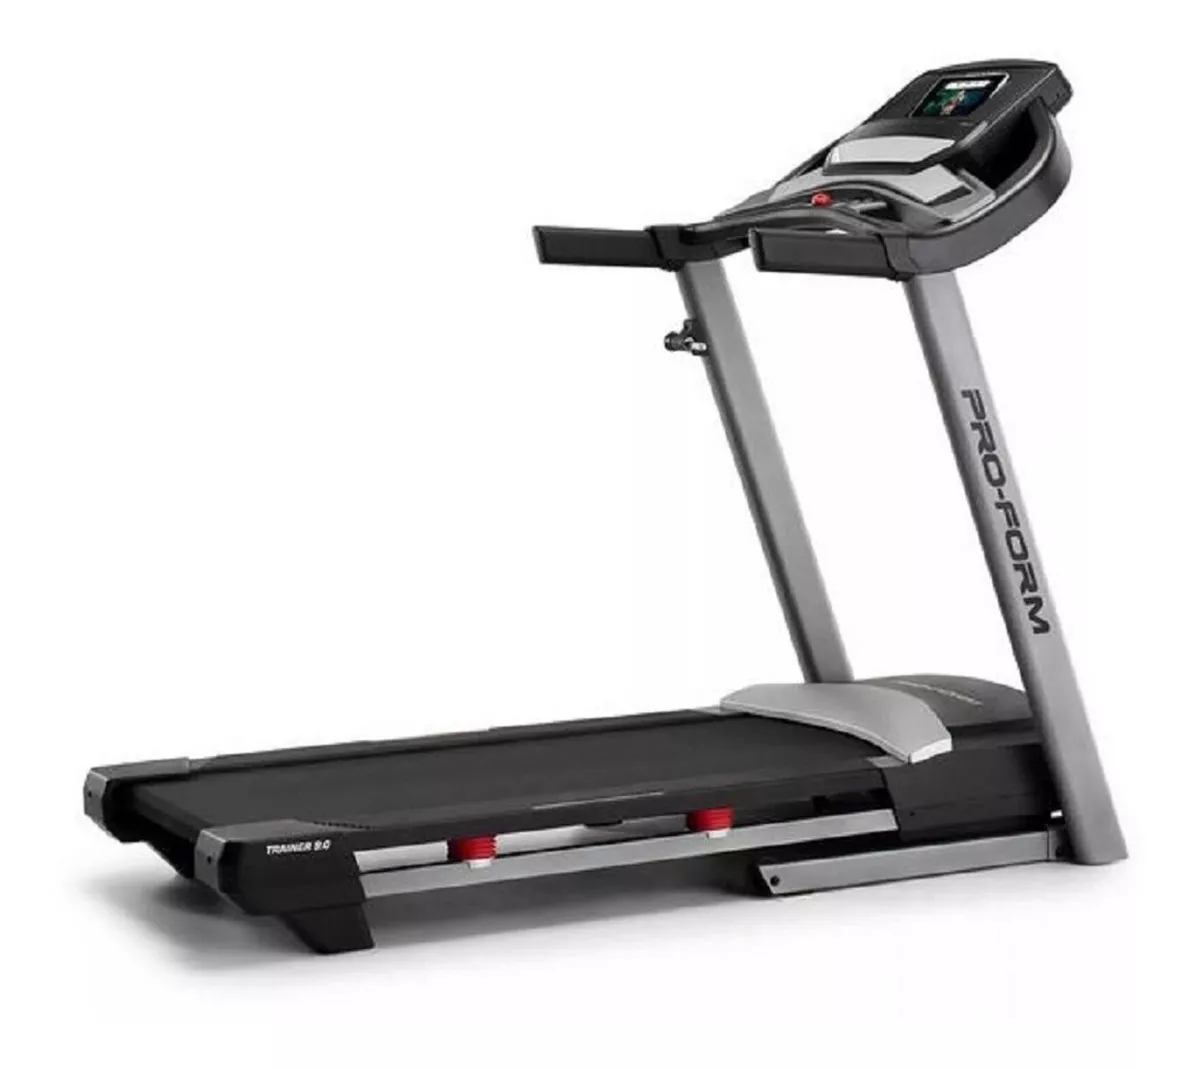 Proform Trainer 10.0 Smart Treadmill With 7 Hd Touchscreen